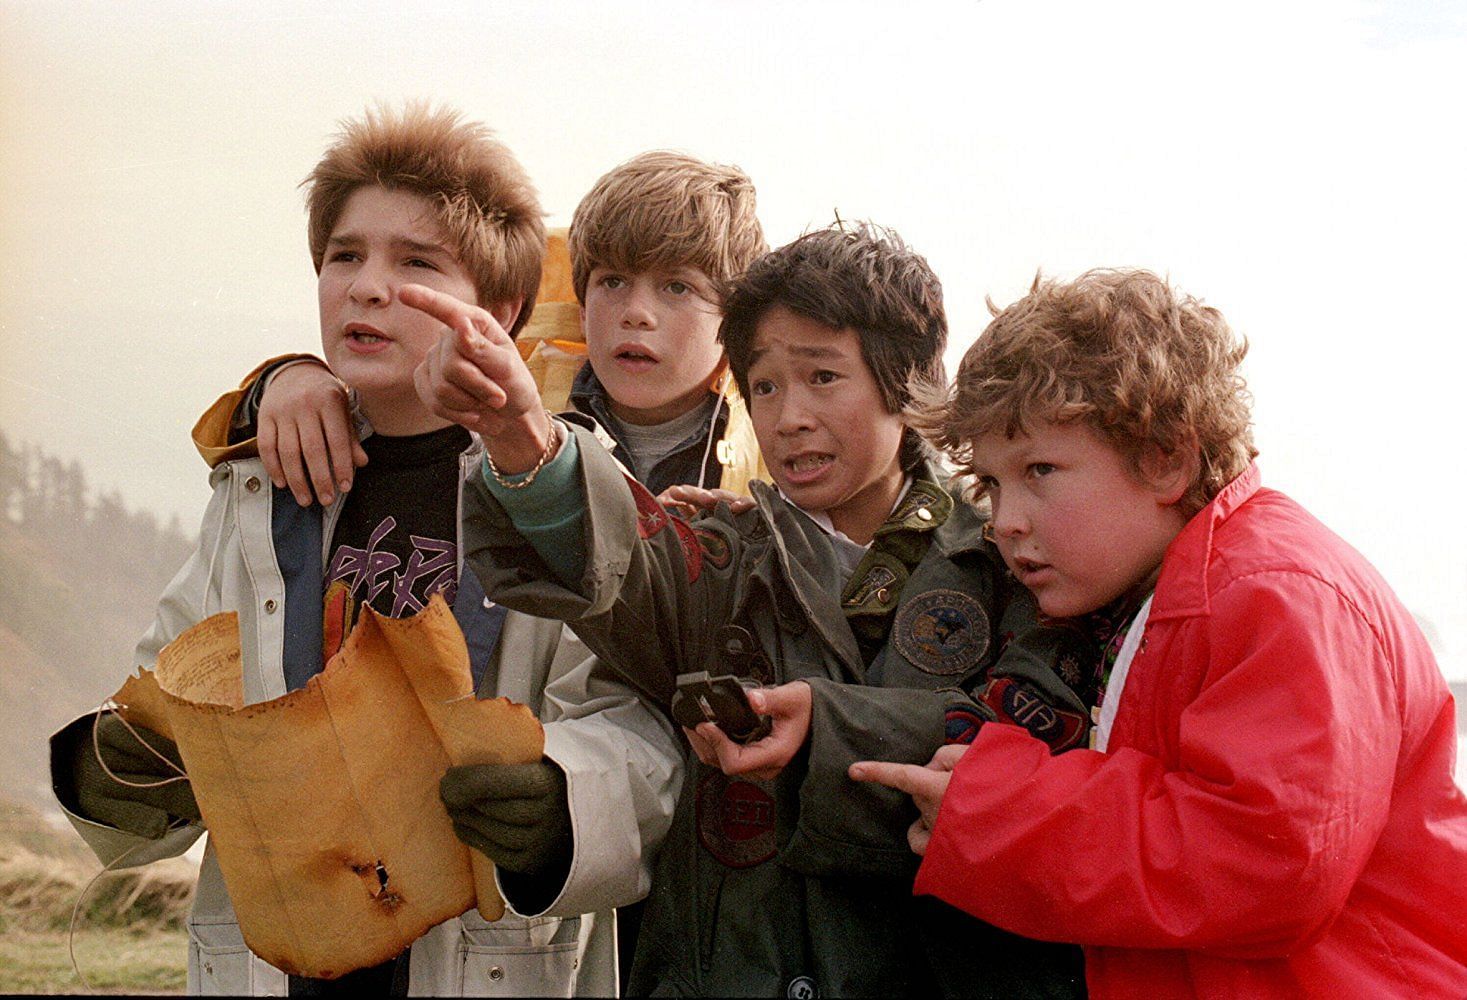 The Goonies was a cult classic released in 1985 (Image via Warner Bros.)